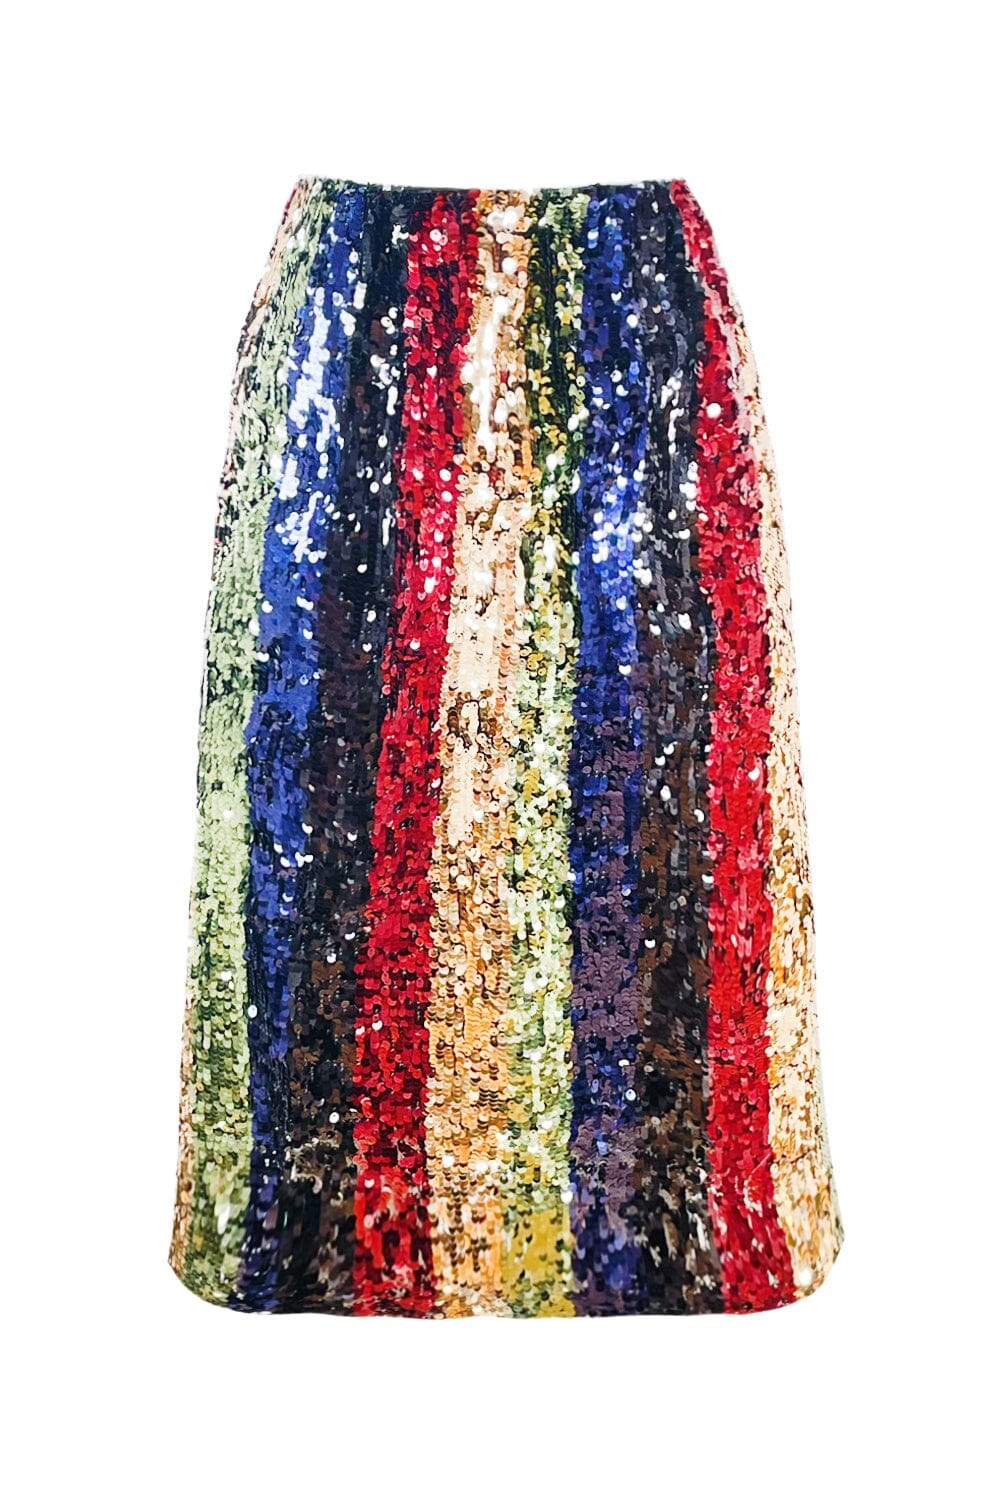 Took Some Sequin Multicolor Stripe Skirt Photos for the Blog